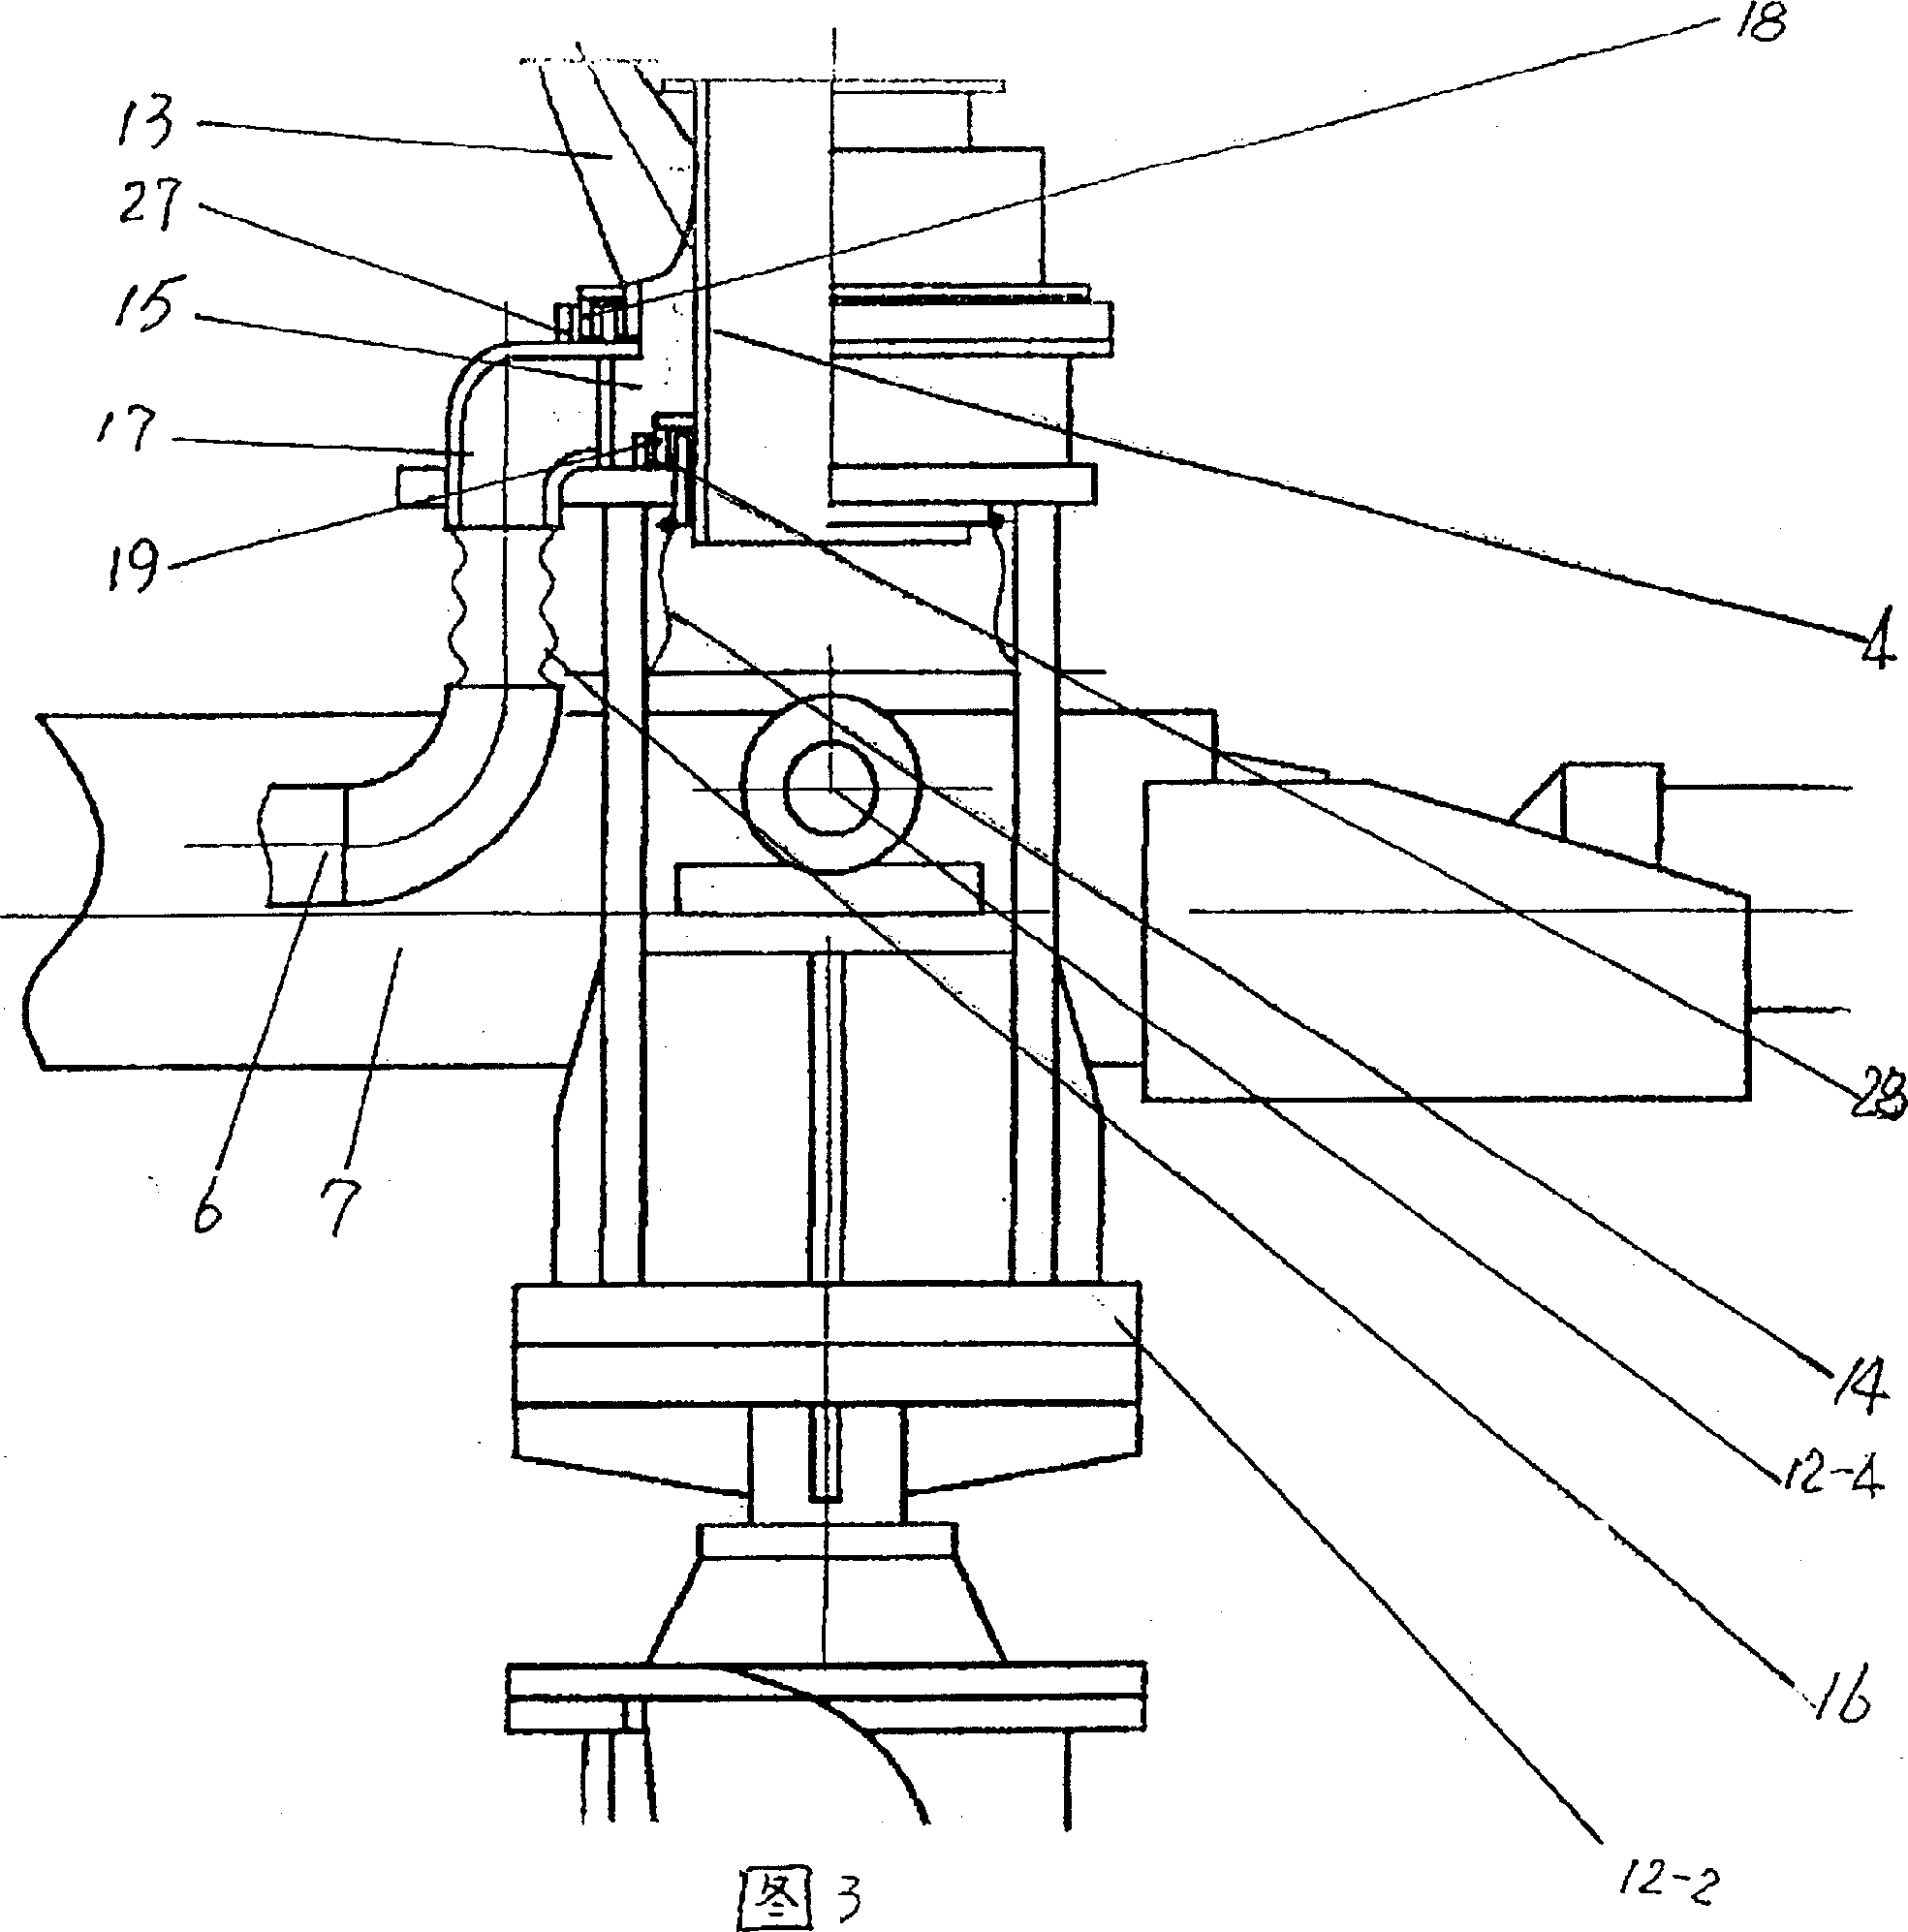 Dust-free carloader for discharging ash from gravitational duster of blast furnace